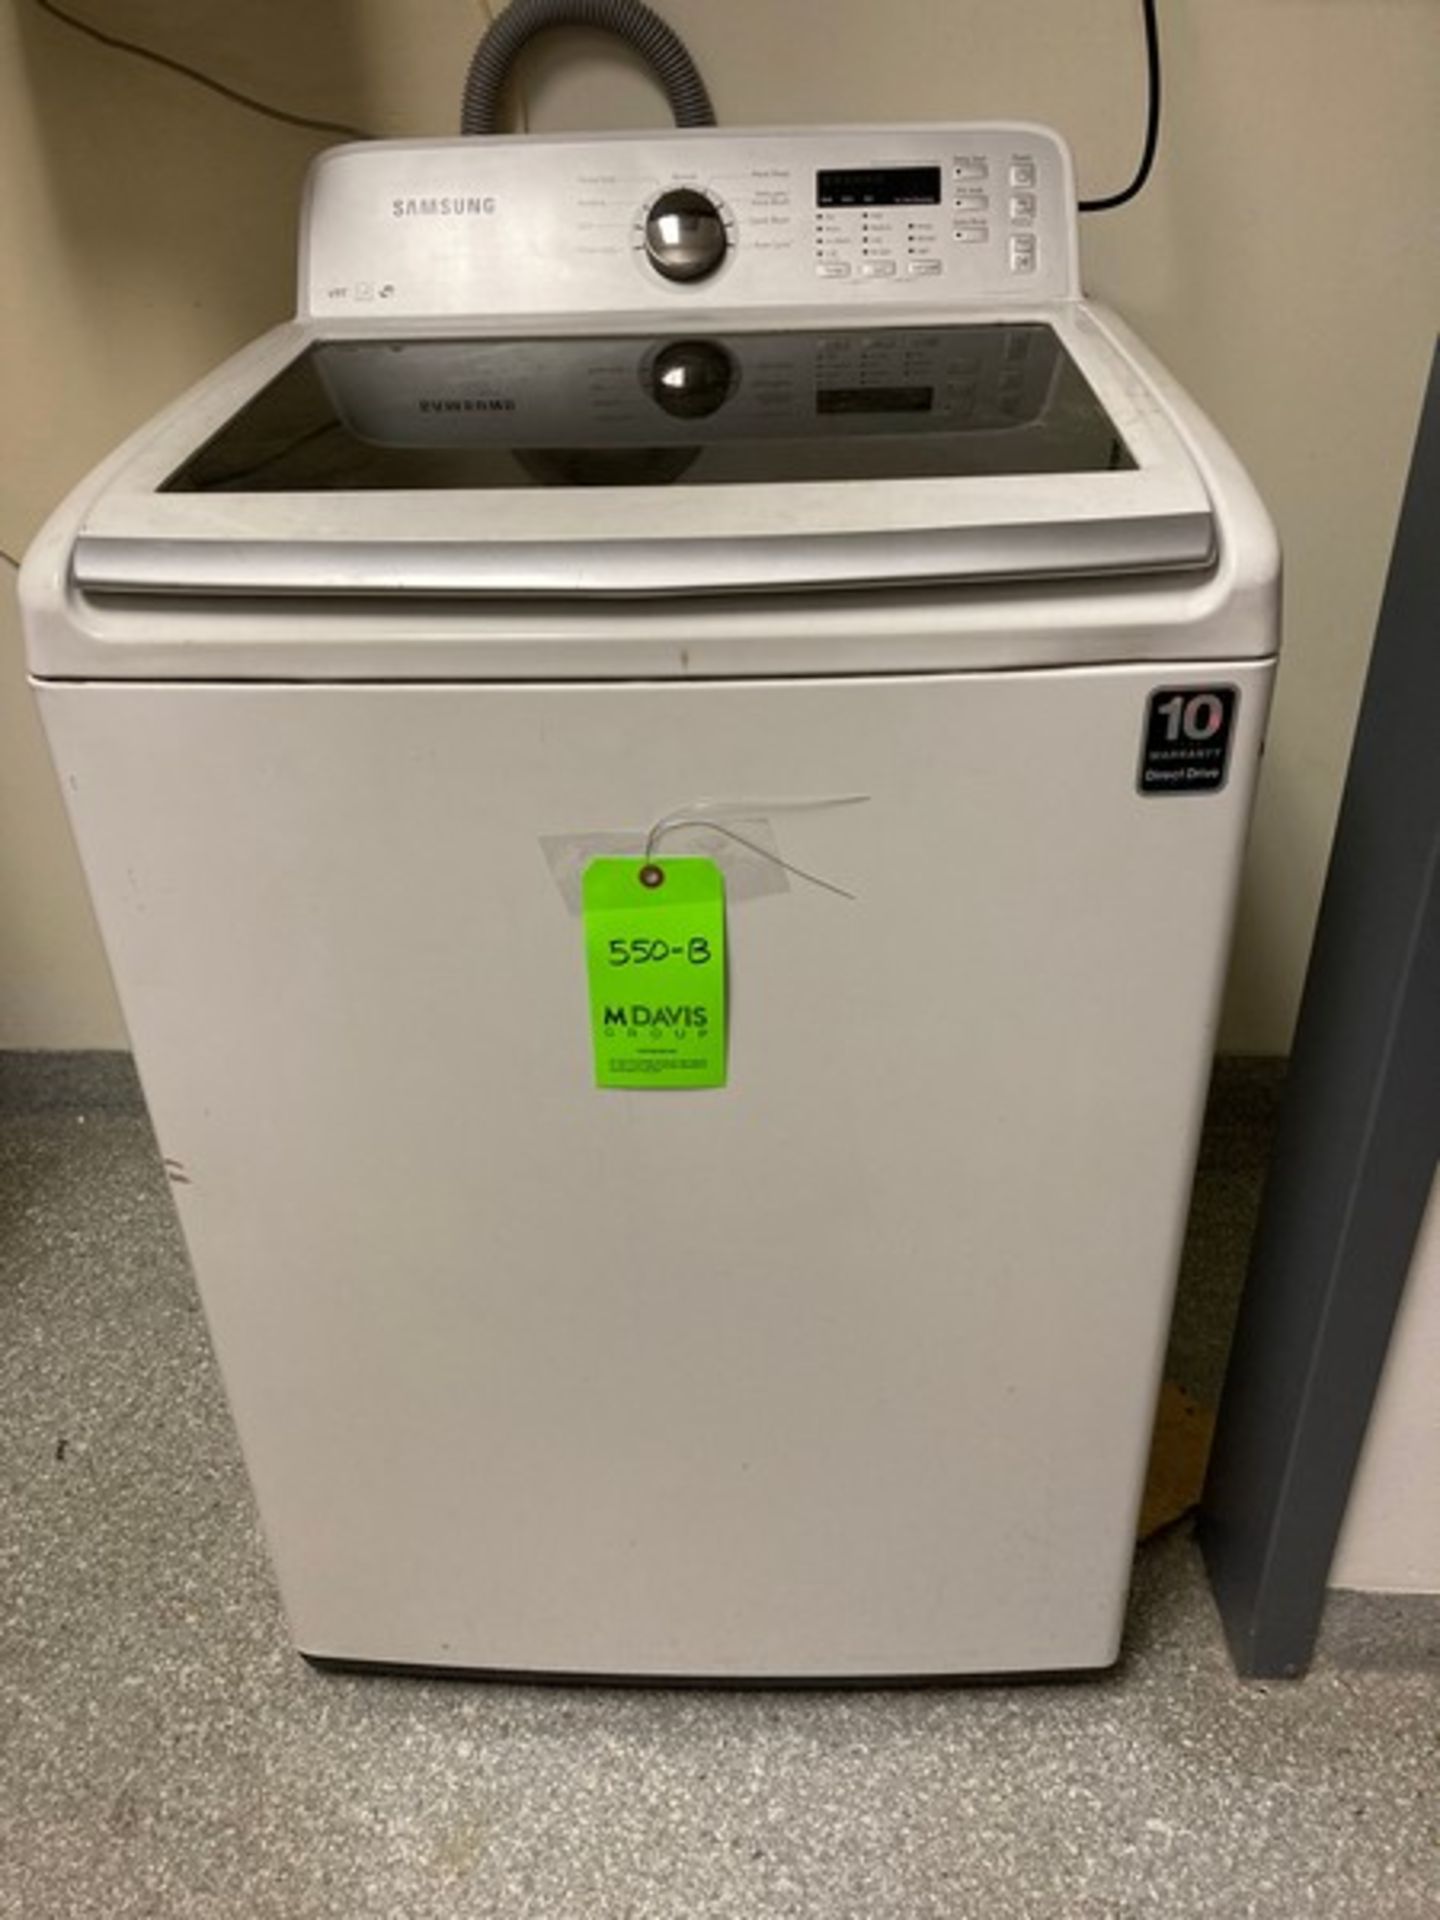 Samsung Hi-Efficiency Top Load Washer VRT / Working / Not Used for Lab Items. (Elevator Handling Fee - Image 3 of 3